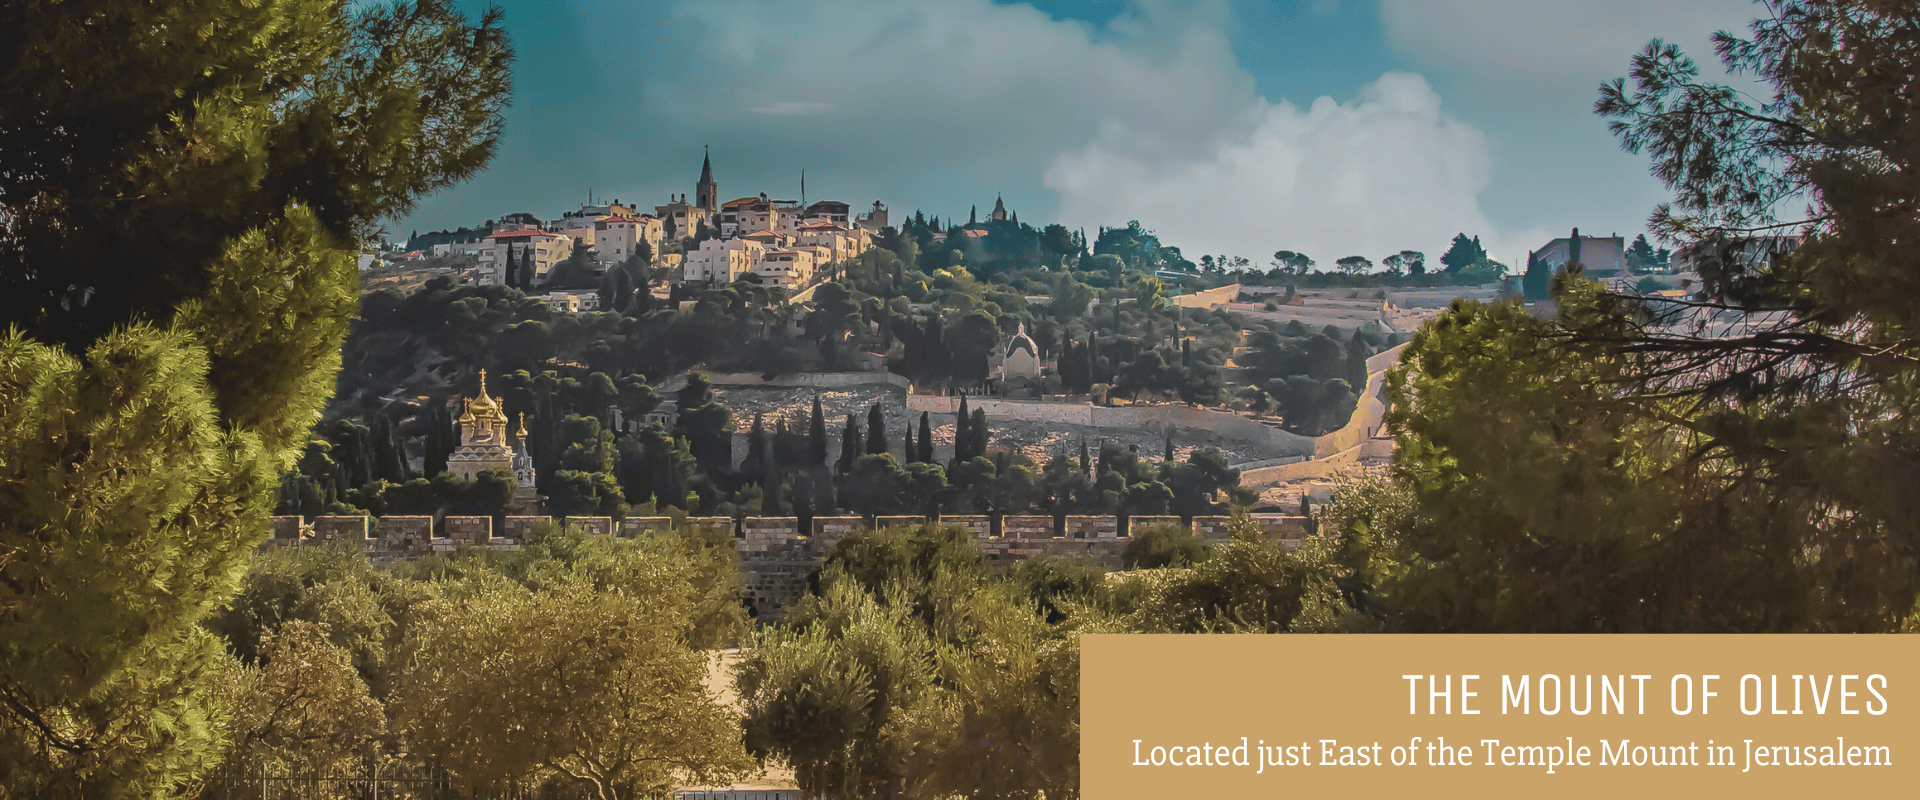 The Mount of Olives - Located East of the Temple Mount in Jerusalem